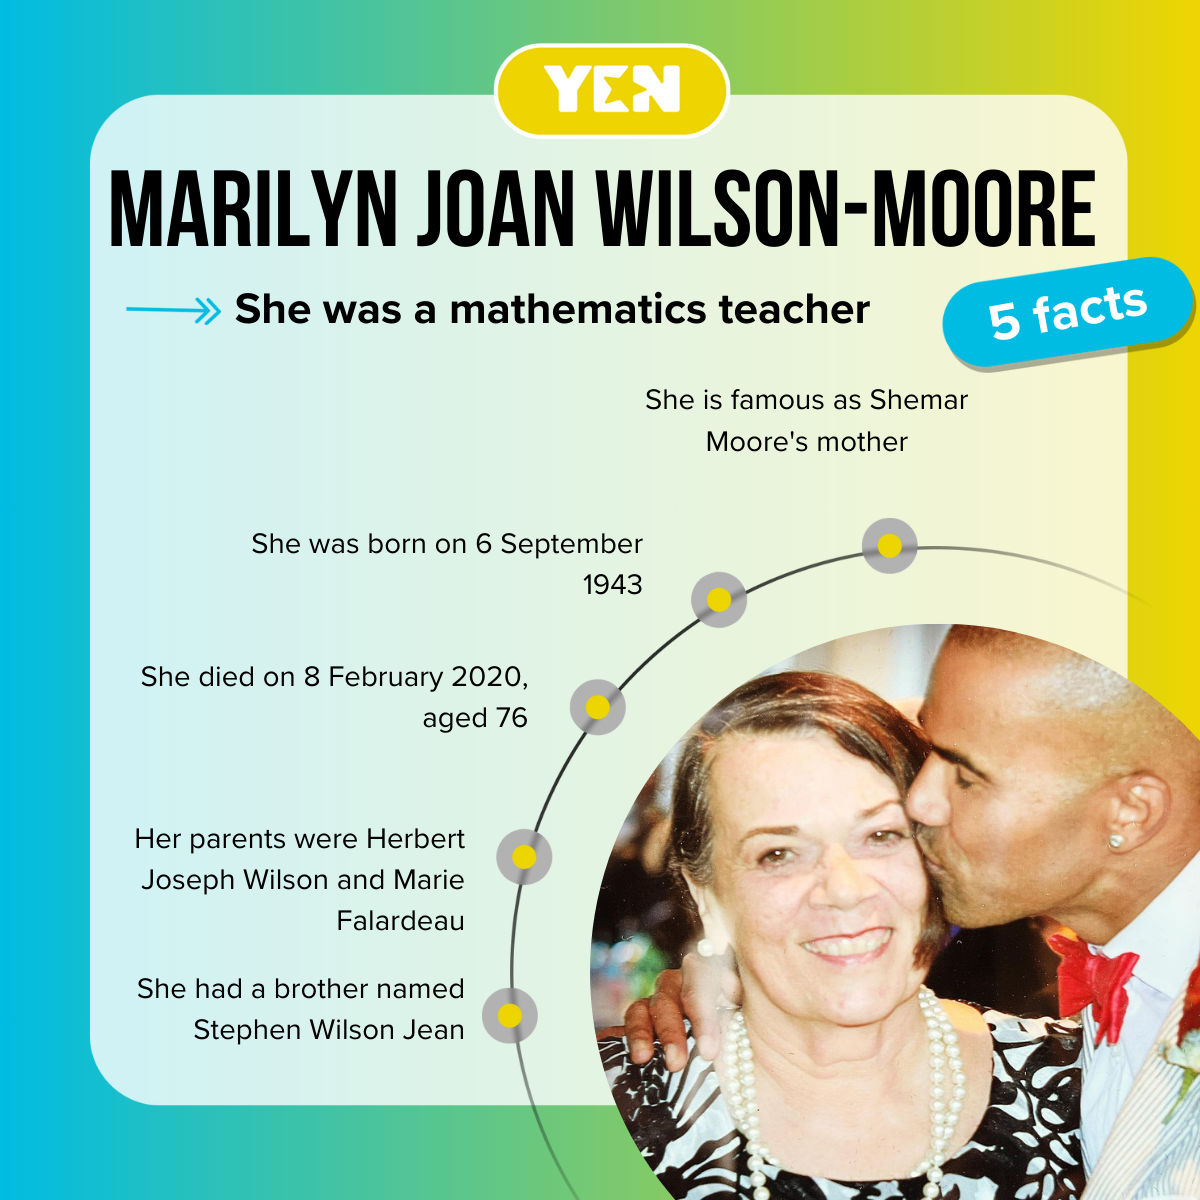 Facts about Marilyn Joan Wilson-Moore